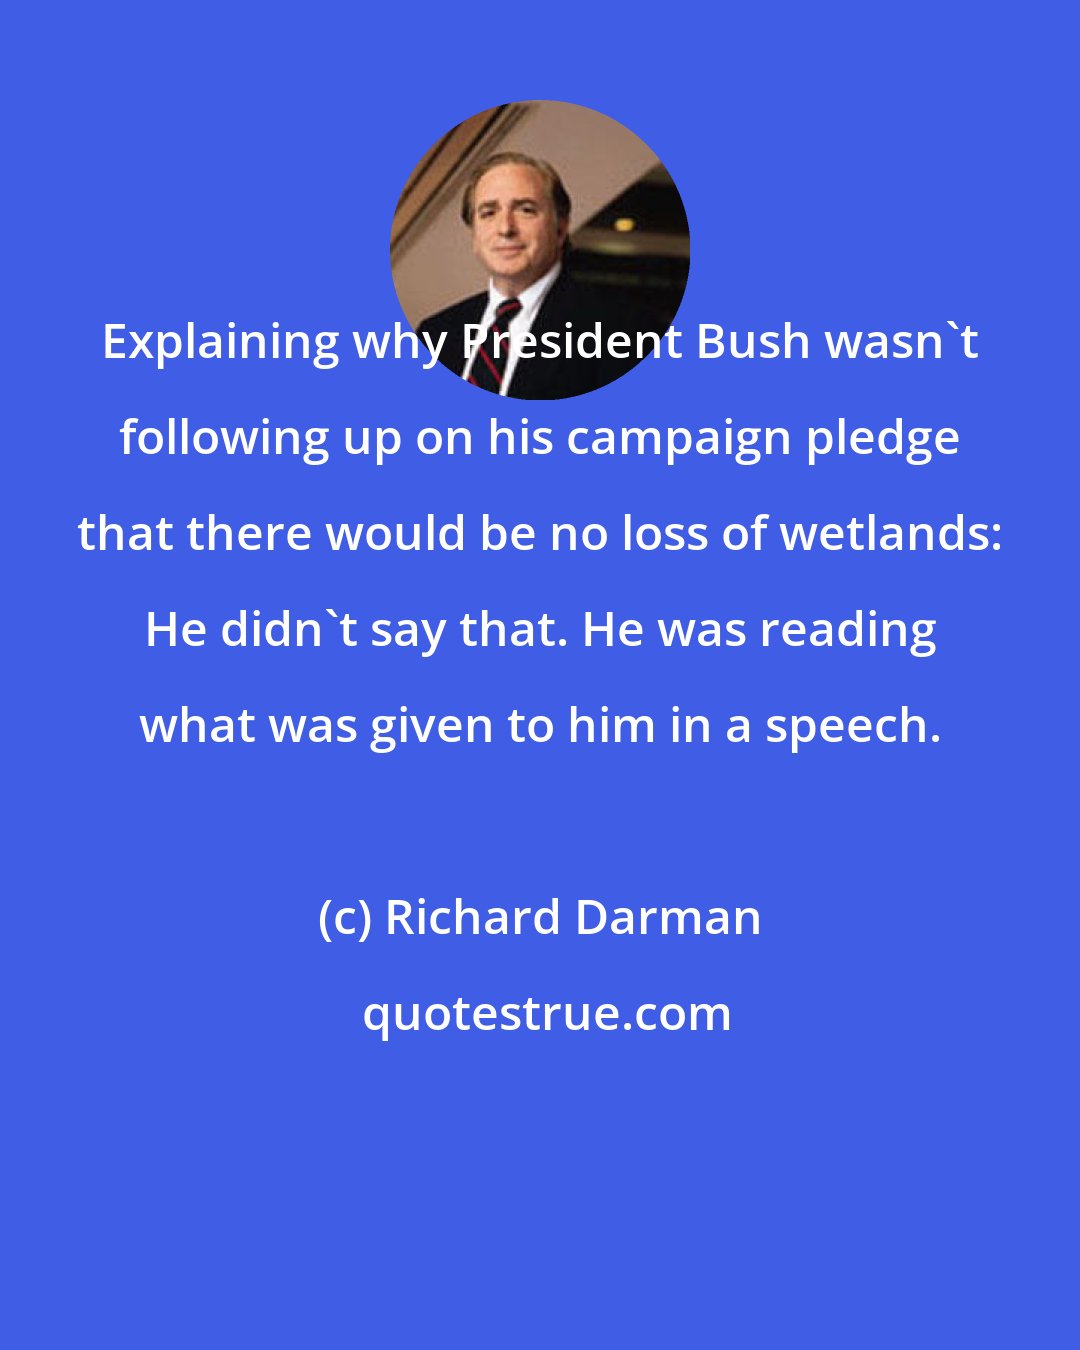 Richard Darman: Explaining why President Bush wasn't following up on his campaign pledge that there would be no loss of wetlands: He didn't say that. He was reading what was given to him in a speech.